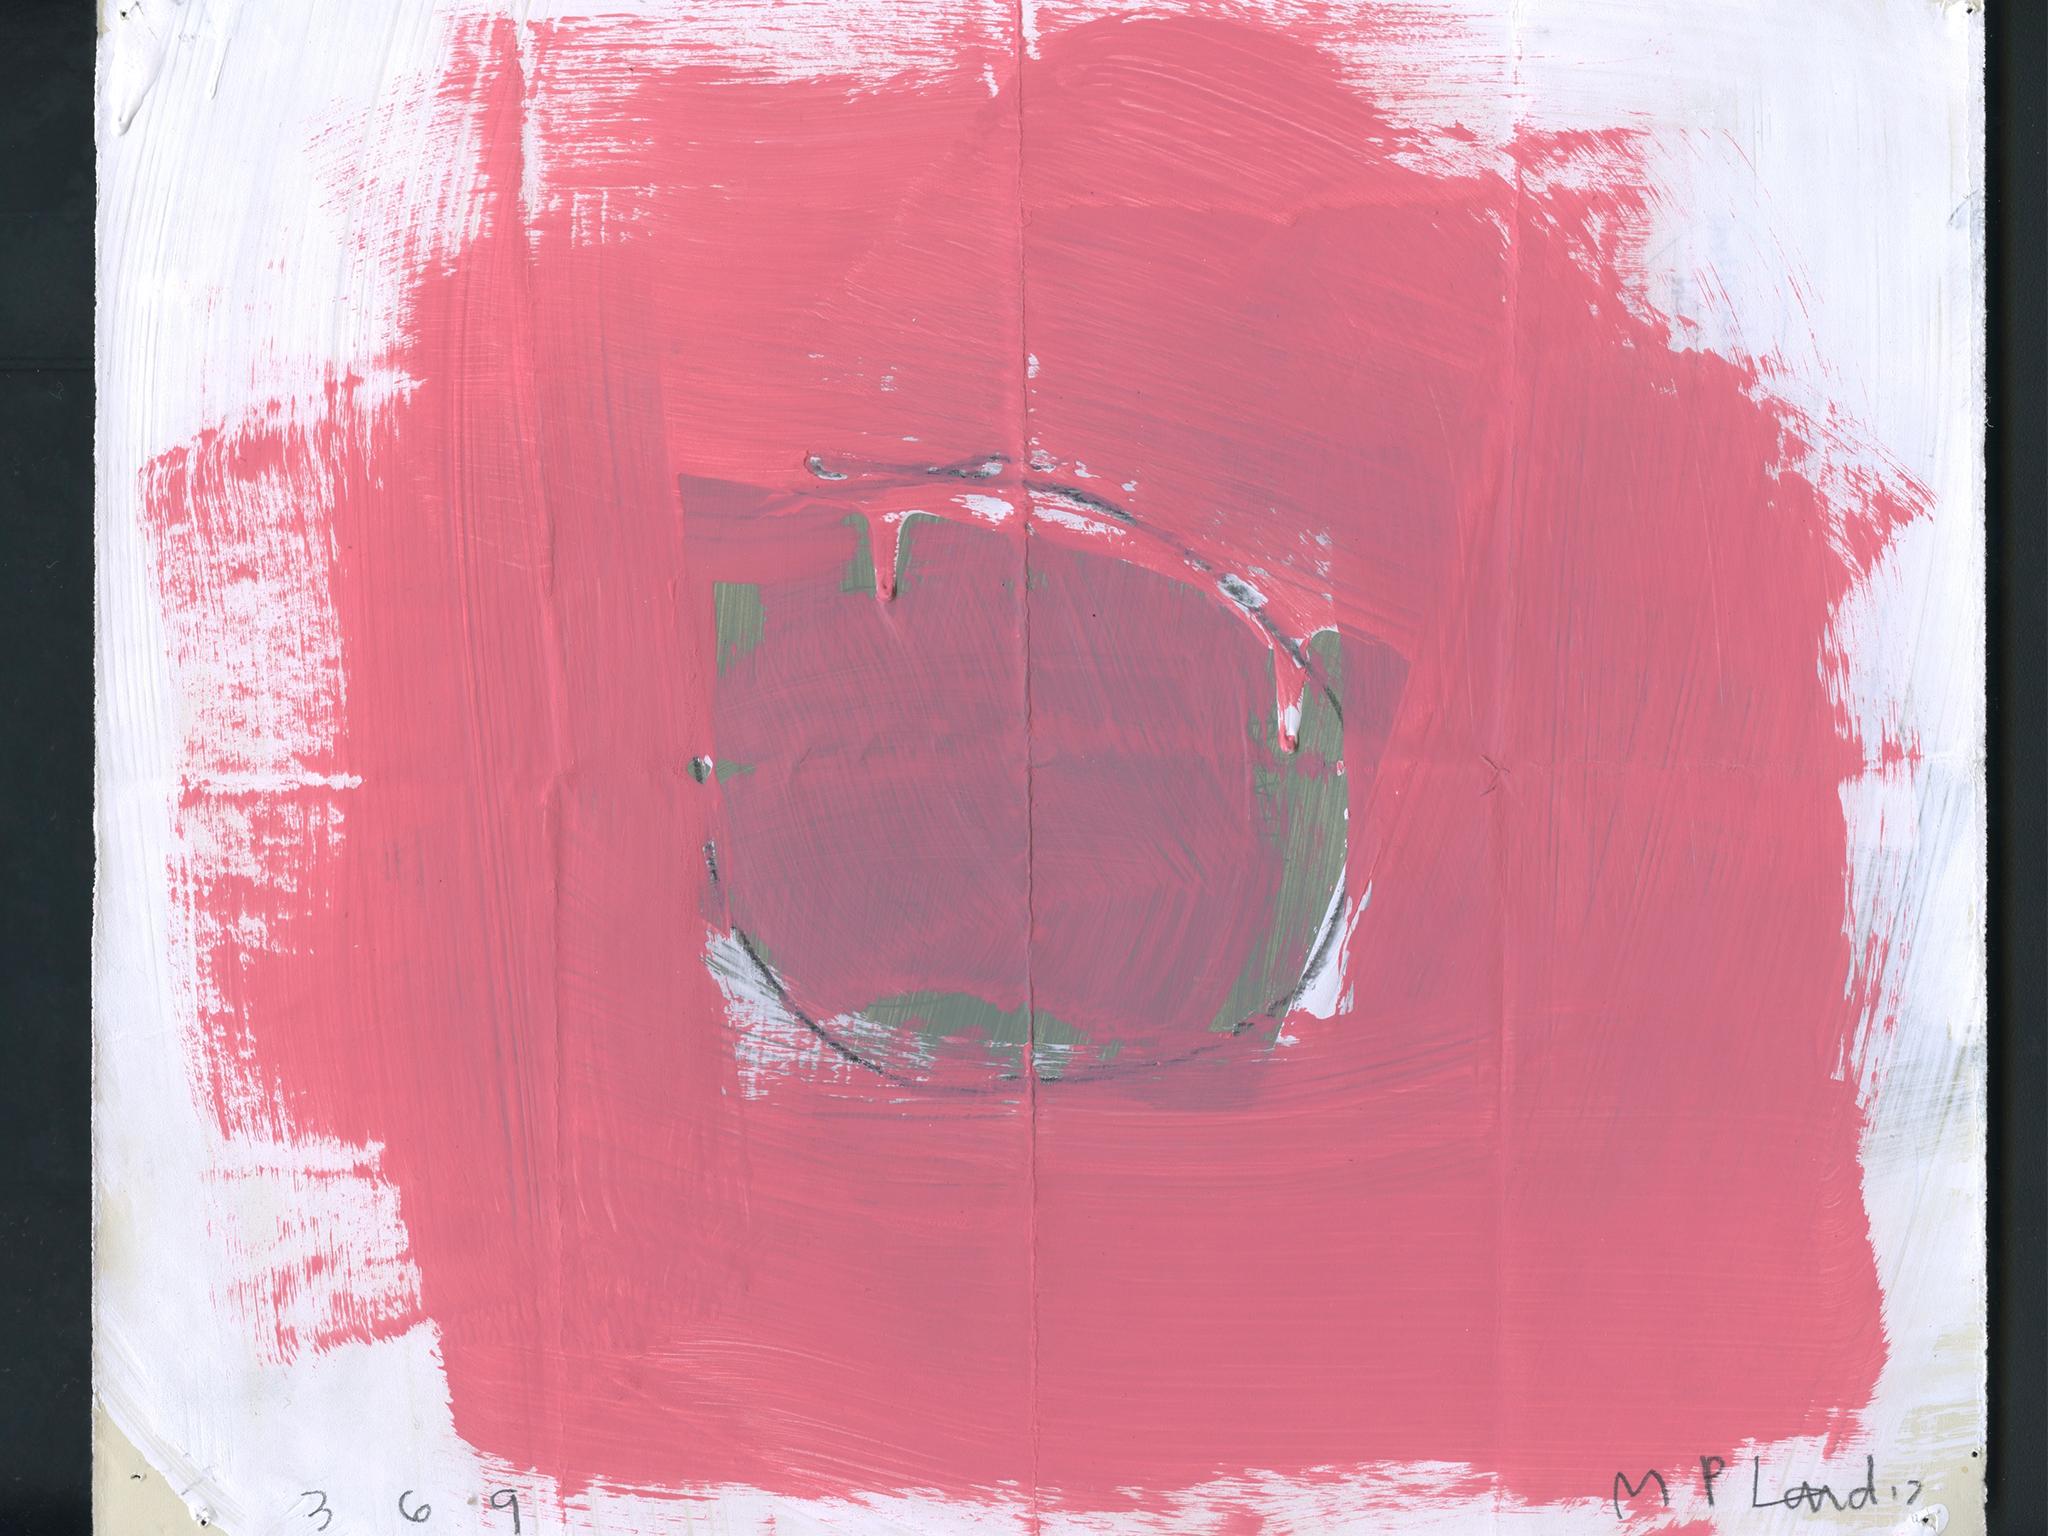 A richly-hued abstract work on paper by the artist M.P. Landis. The artist's abstract paintings and works on paper are the type that take form through the artist's layering of materials over time. This drawing is from the artist's series mixed-media